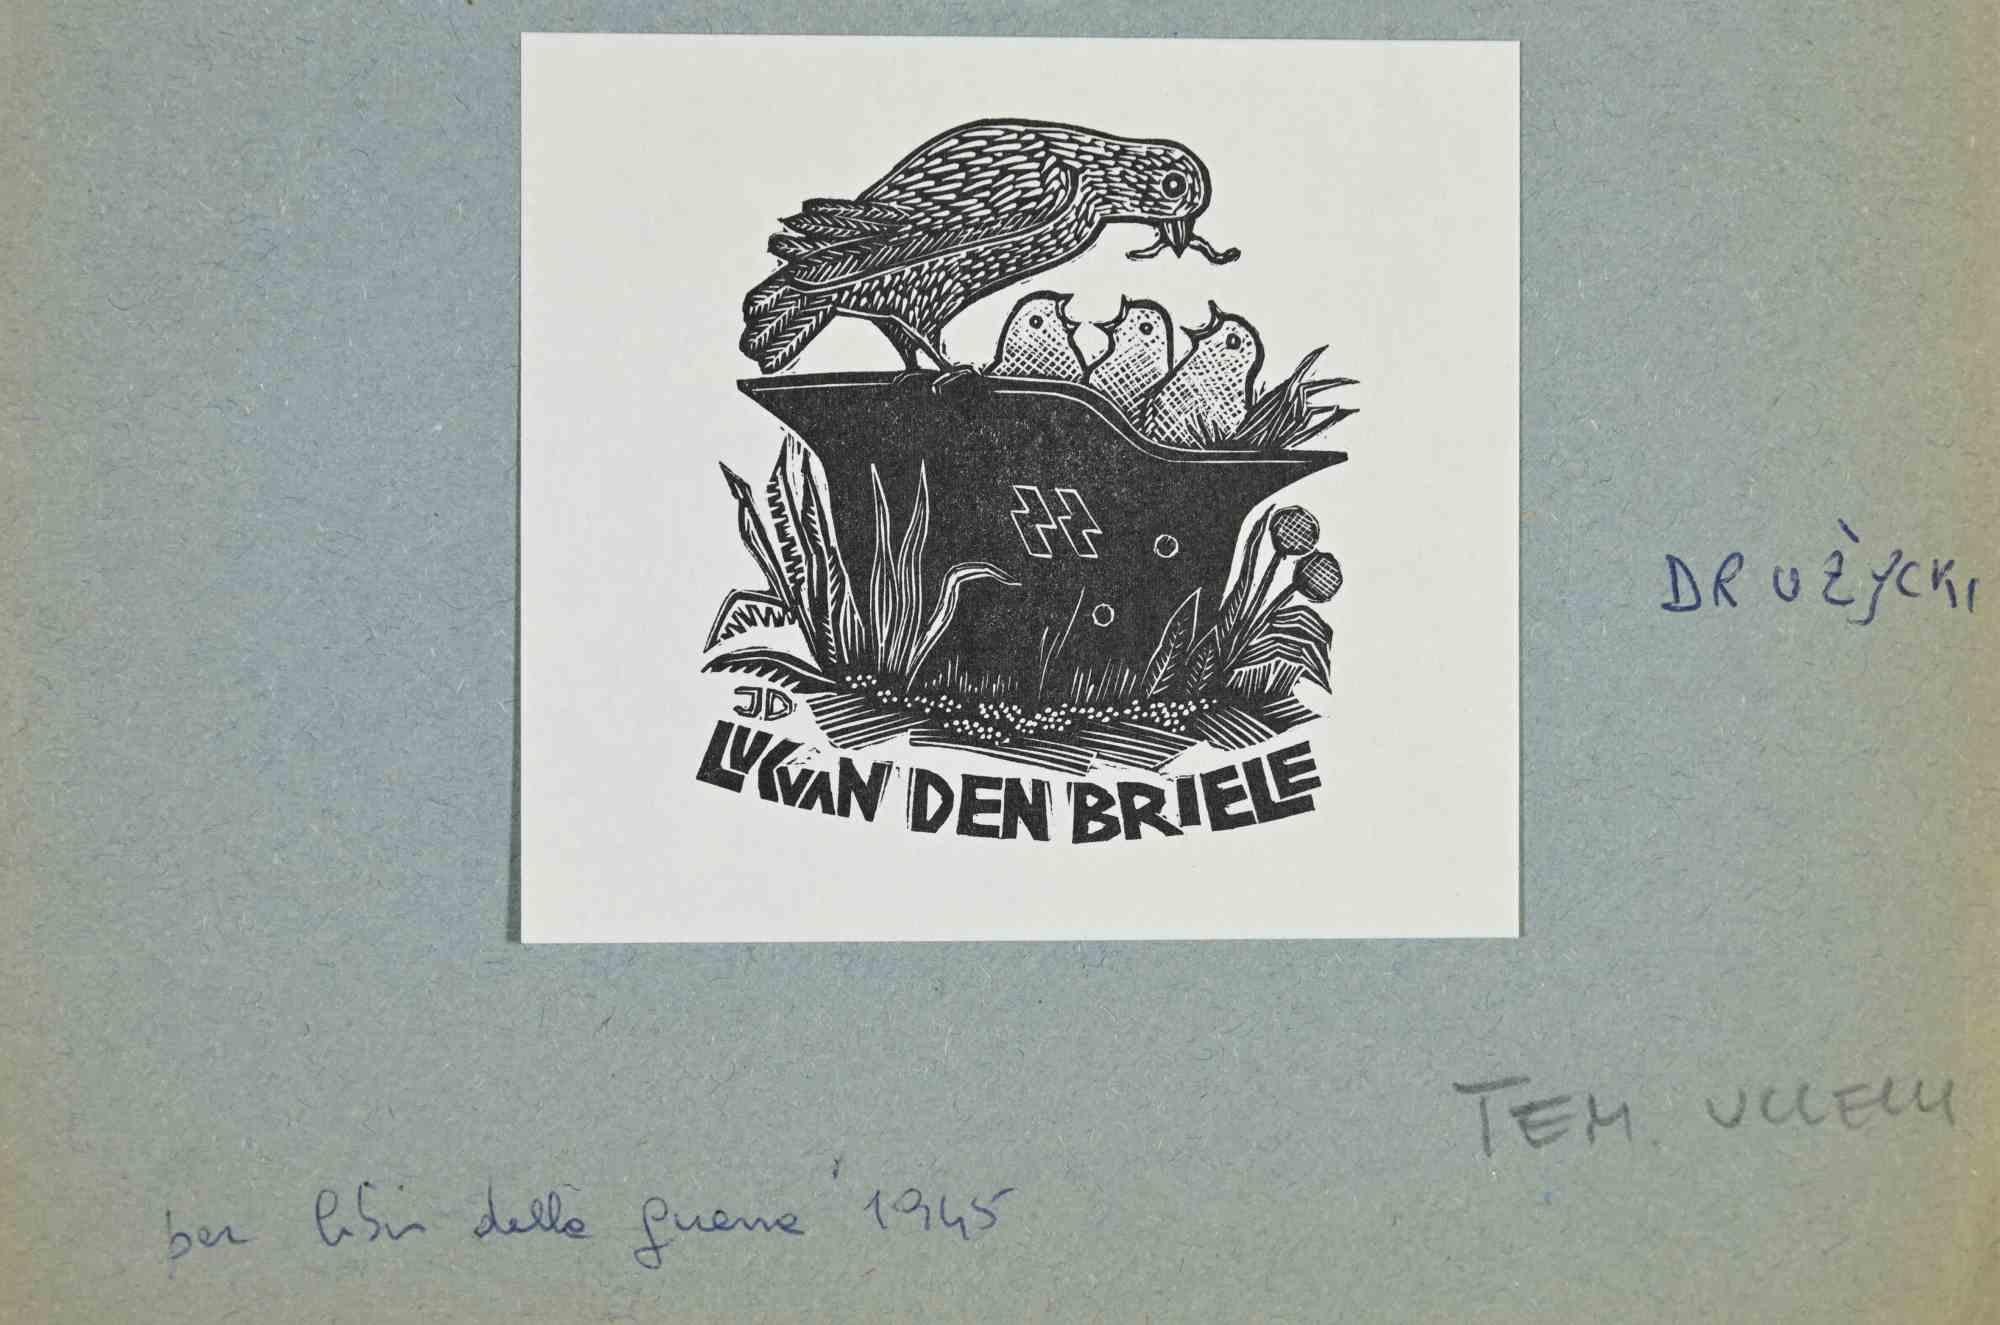 Ex libris - Lucyan den Briele is an Artwork realized in 1974  by the Artist Jerzy Druzycki (1930-1995), from Poland. 

Woodcut print on ivory paper. Monogrammed on plate on the left margin. The work is glued on colored cardboard.

Total dimensions: